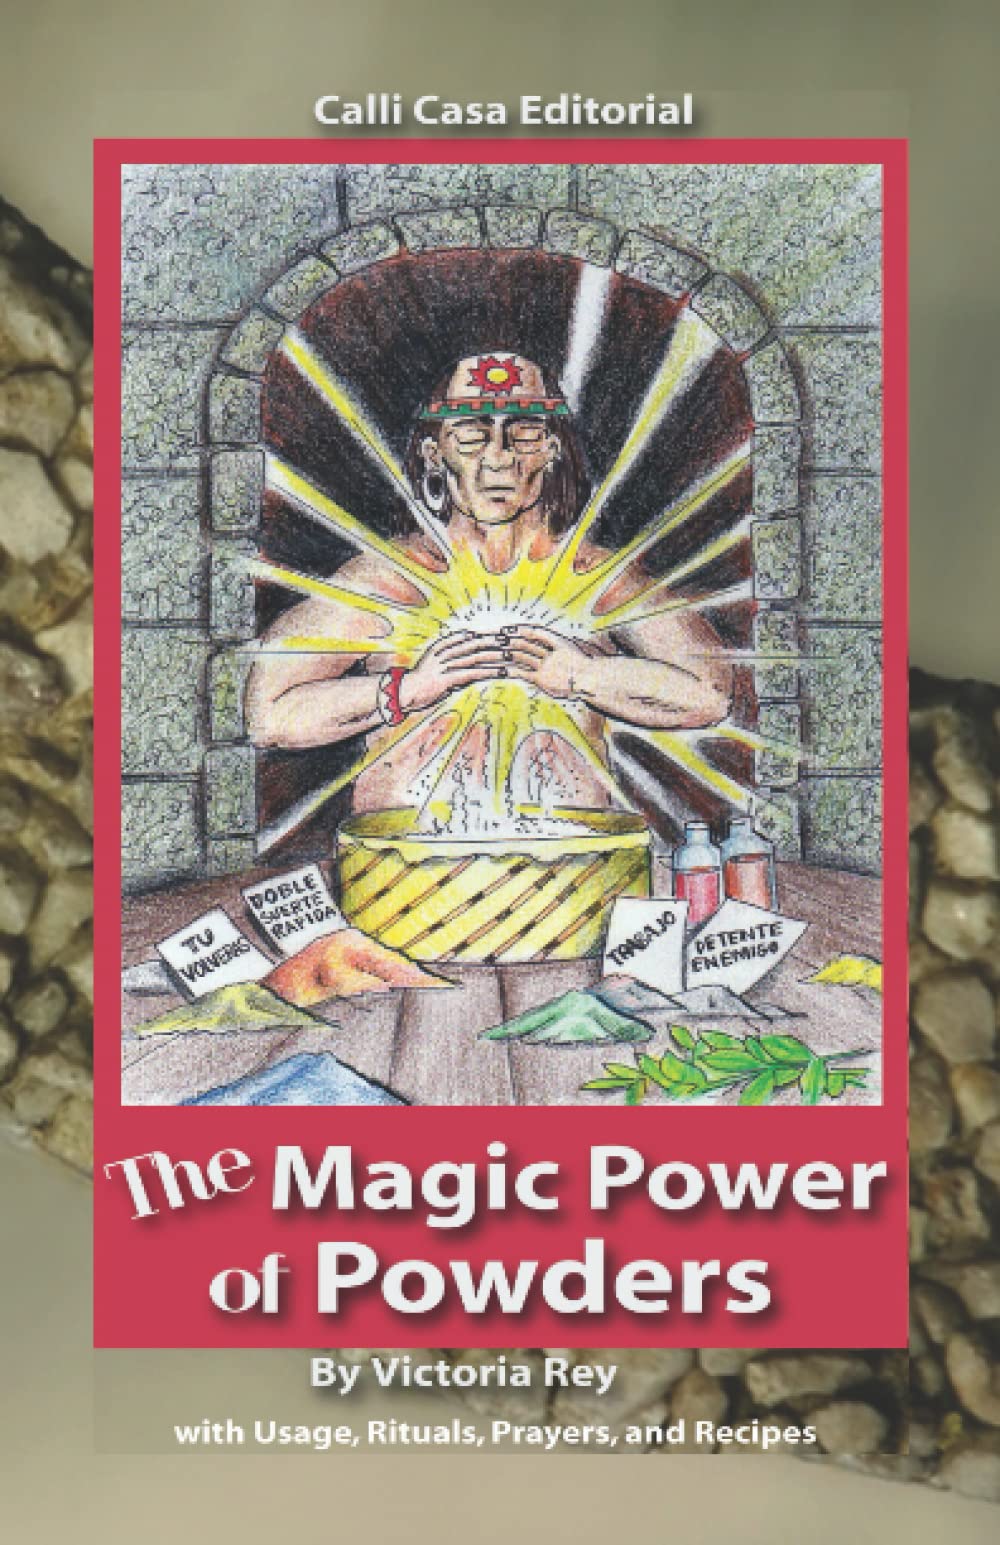 Magic Power of Powders: With Usage, Rituals, Prayers and. Recipes by Victoria Rey